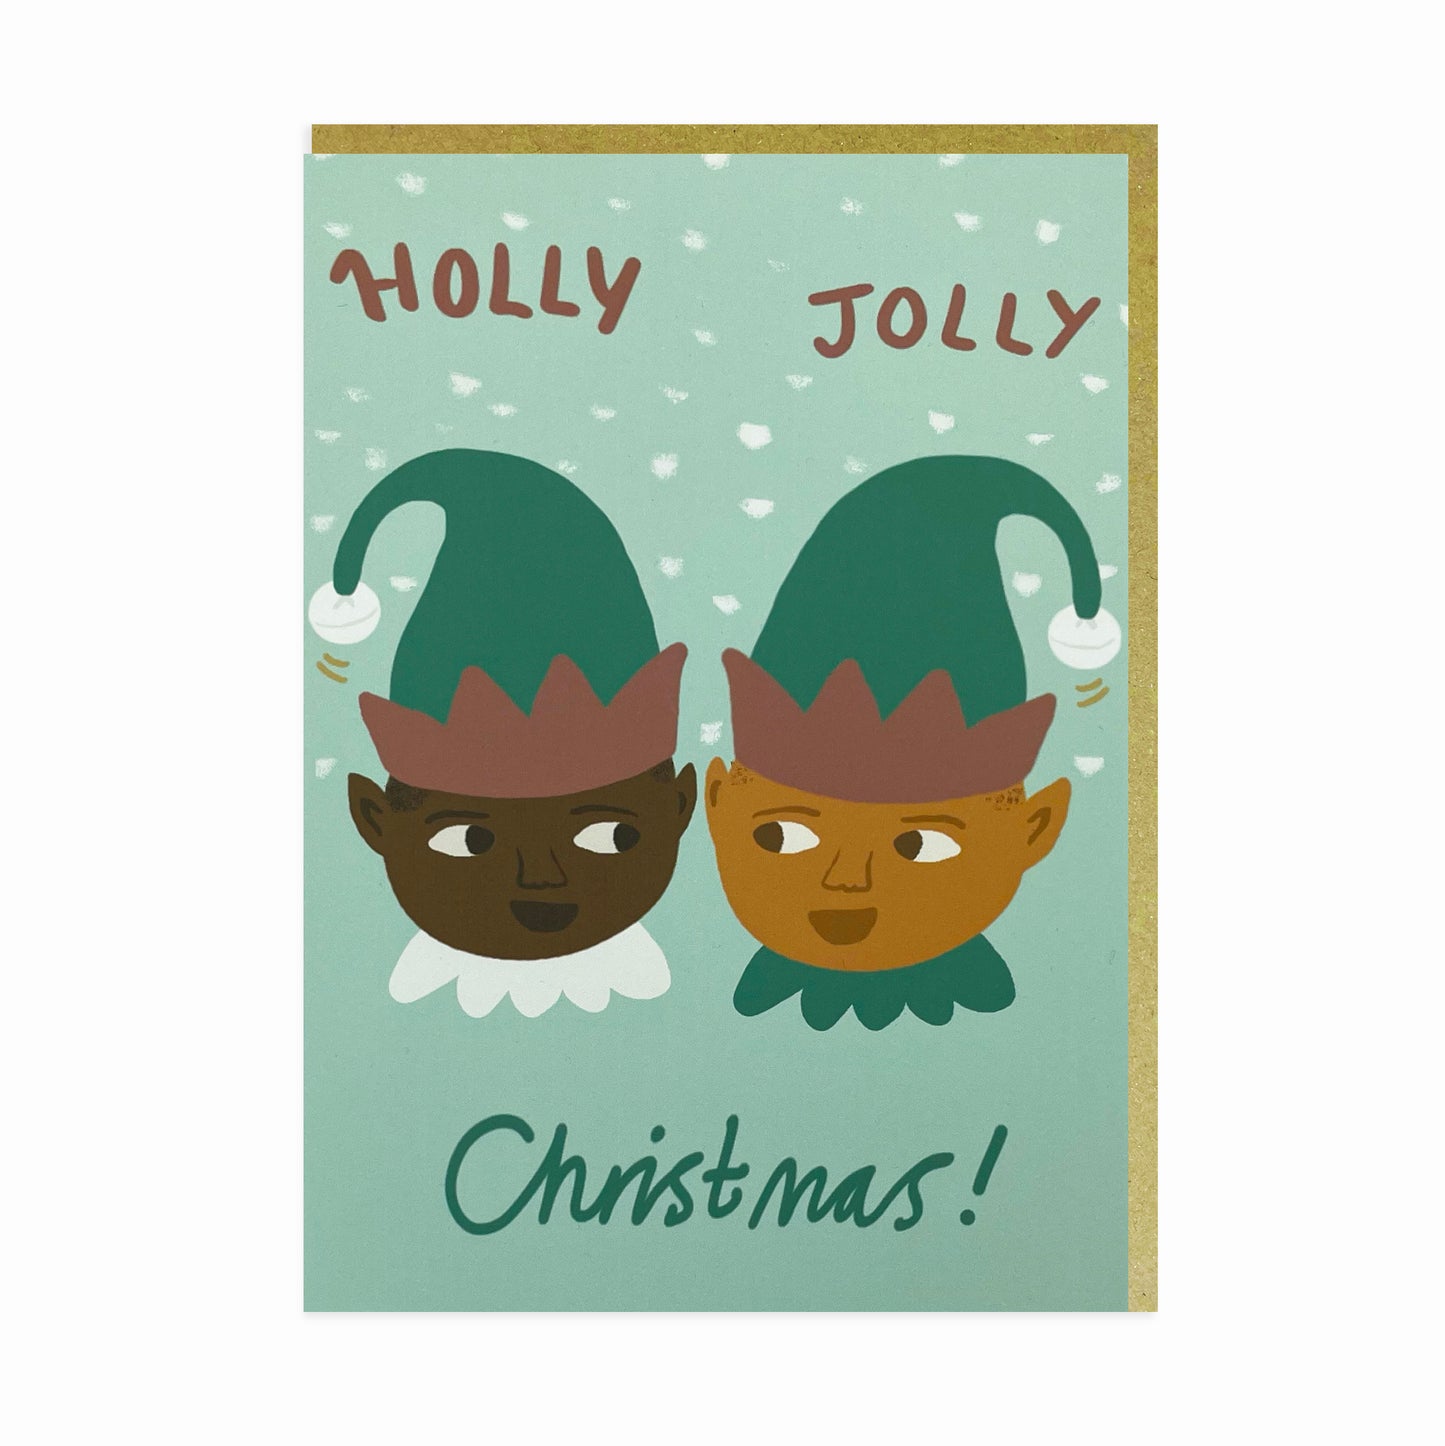 Two Happy Black Christmas Elves with falling snow. Black Christmas card.